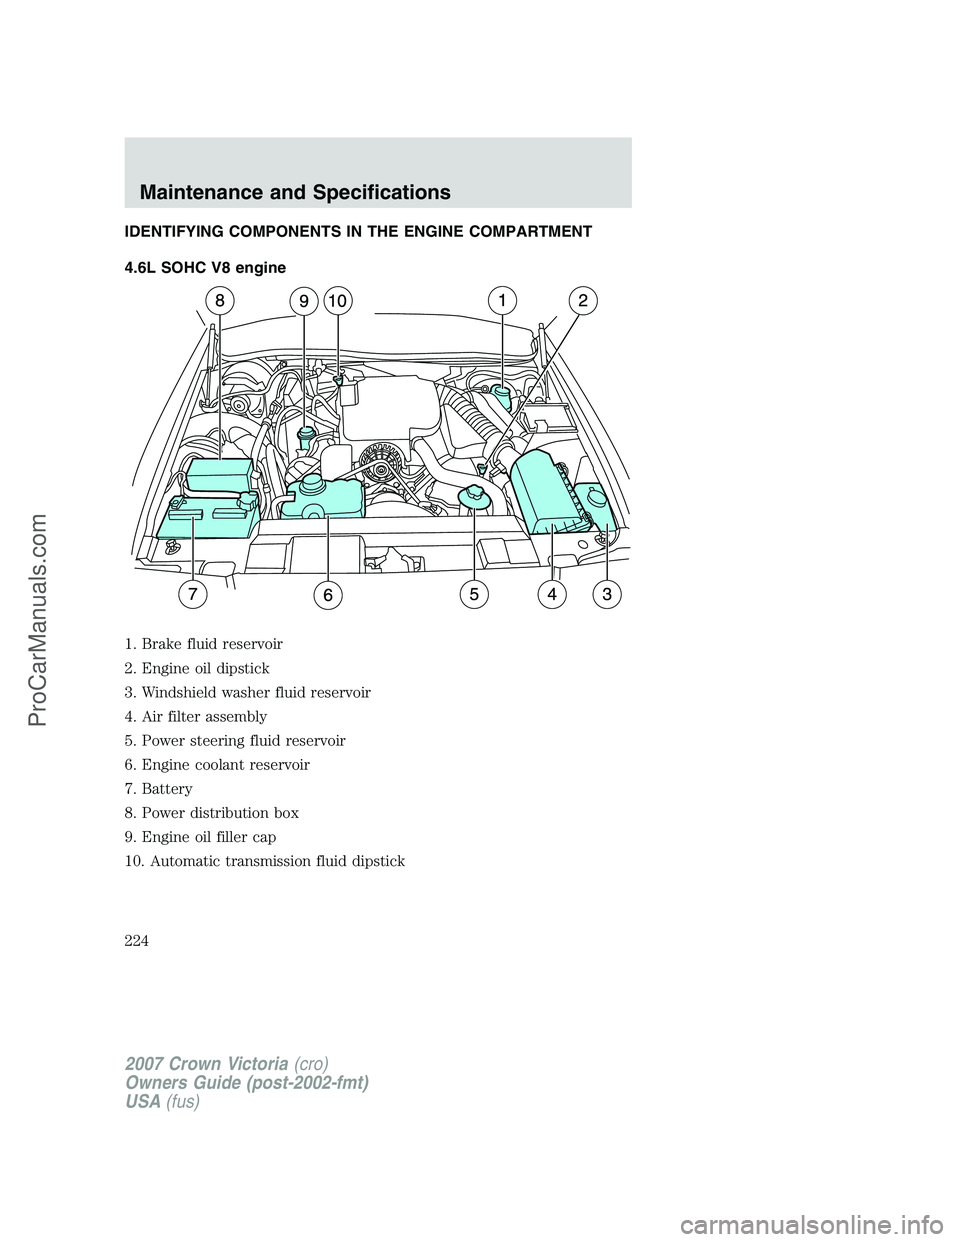 FORD E-450 2007  Owners Manual IDENTIFYING COMPONENTS IN THE ENGINE COMPARTMENT
4.6L SOHC V8 engine
1. Brake fluid reservoir
2. Engine oil dipstick
3. Windshield washer fluid reservoir
4. Air filter assembly
5. Power steering fluid